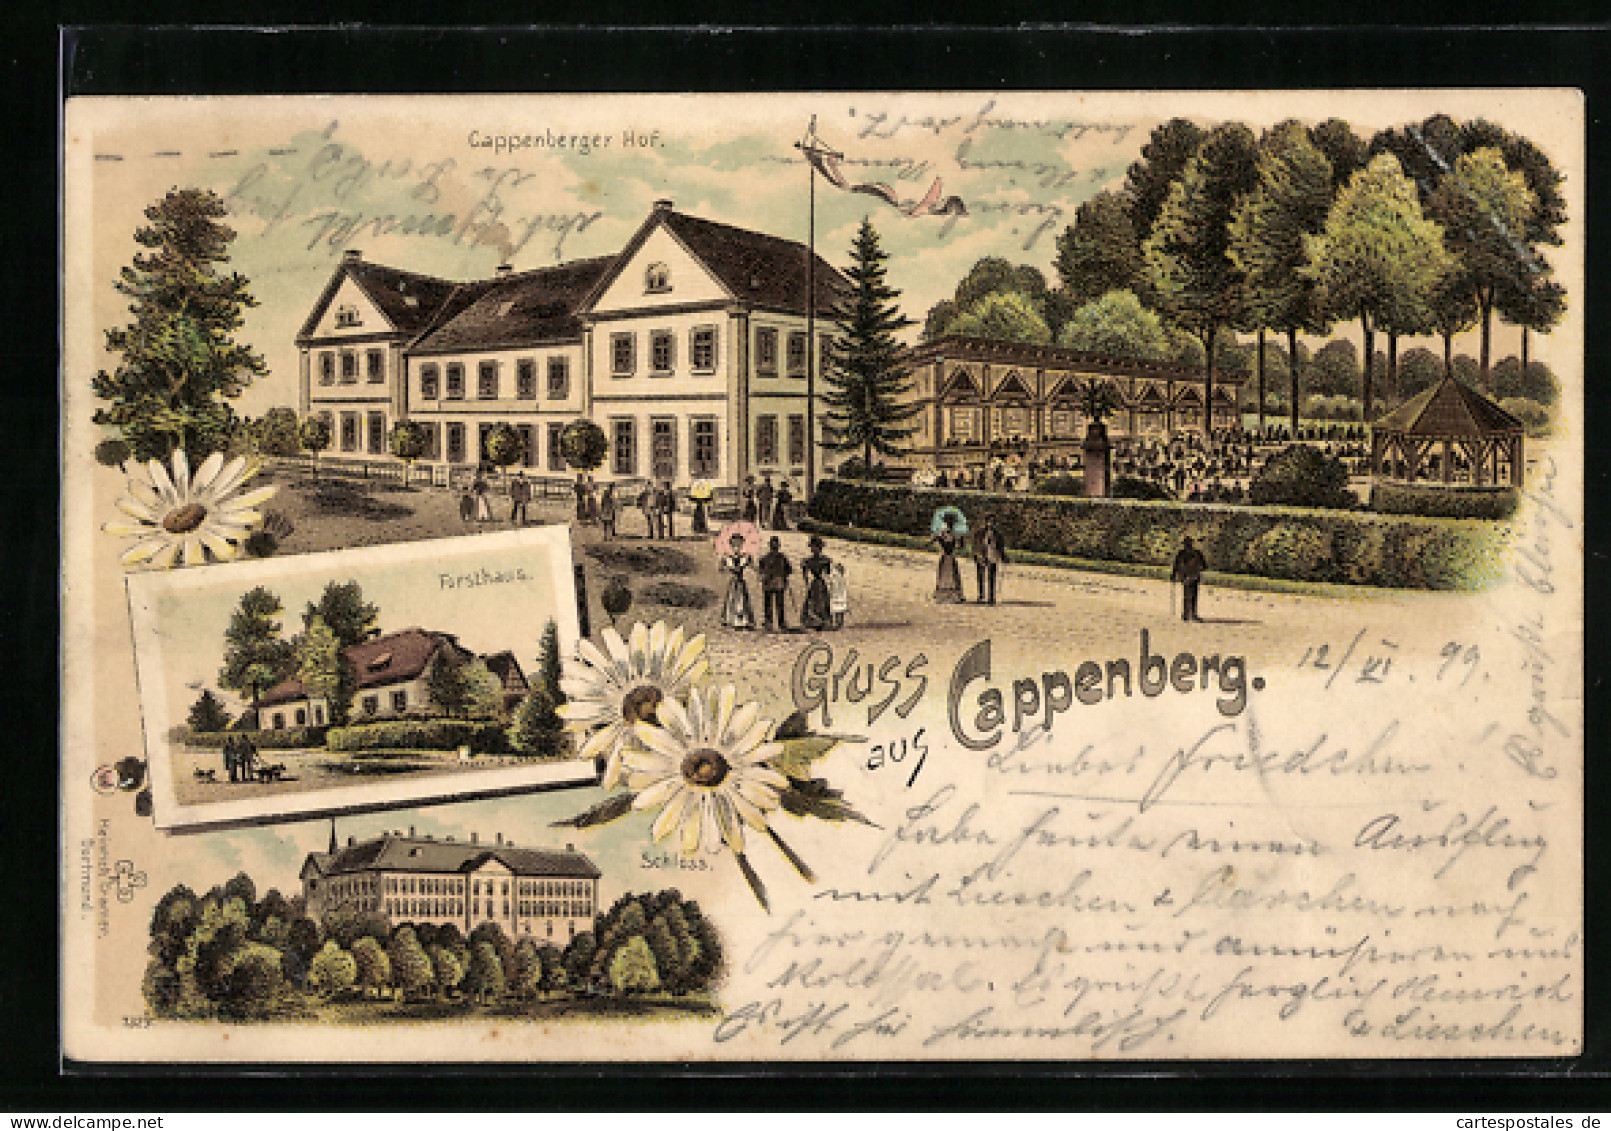 Lithographie Cappenberg, Gasthaus Cappenberger Hof, Forsthaus Schloss  - Chasse